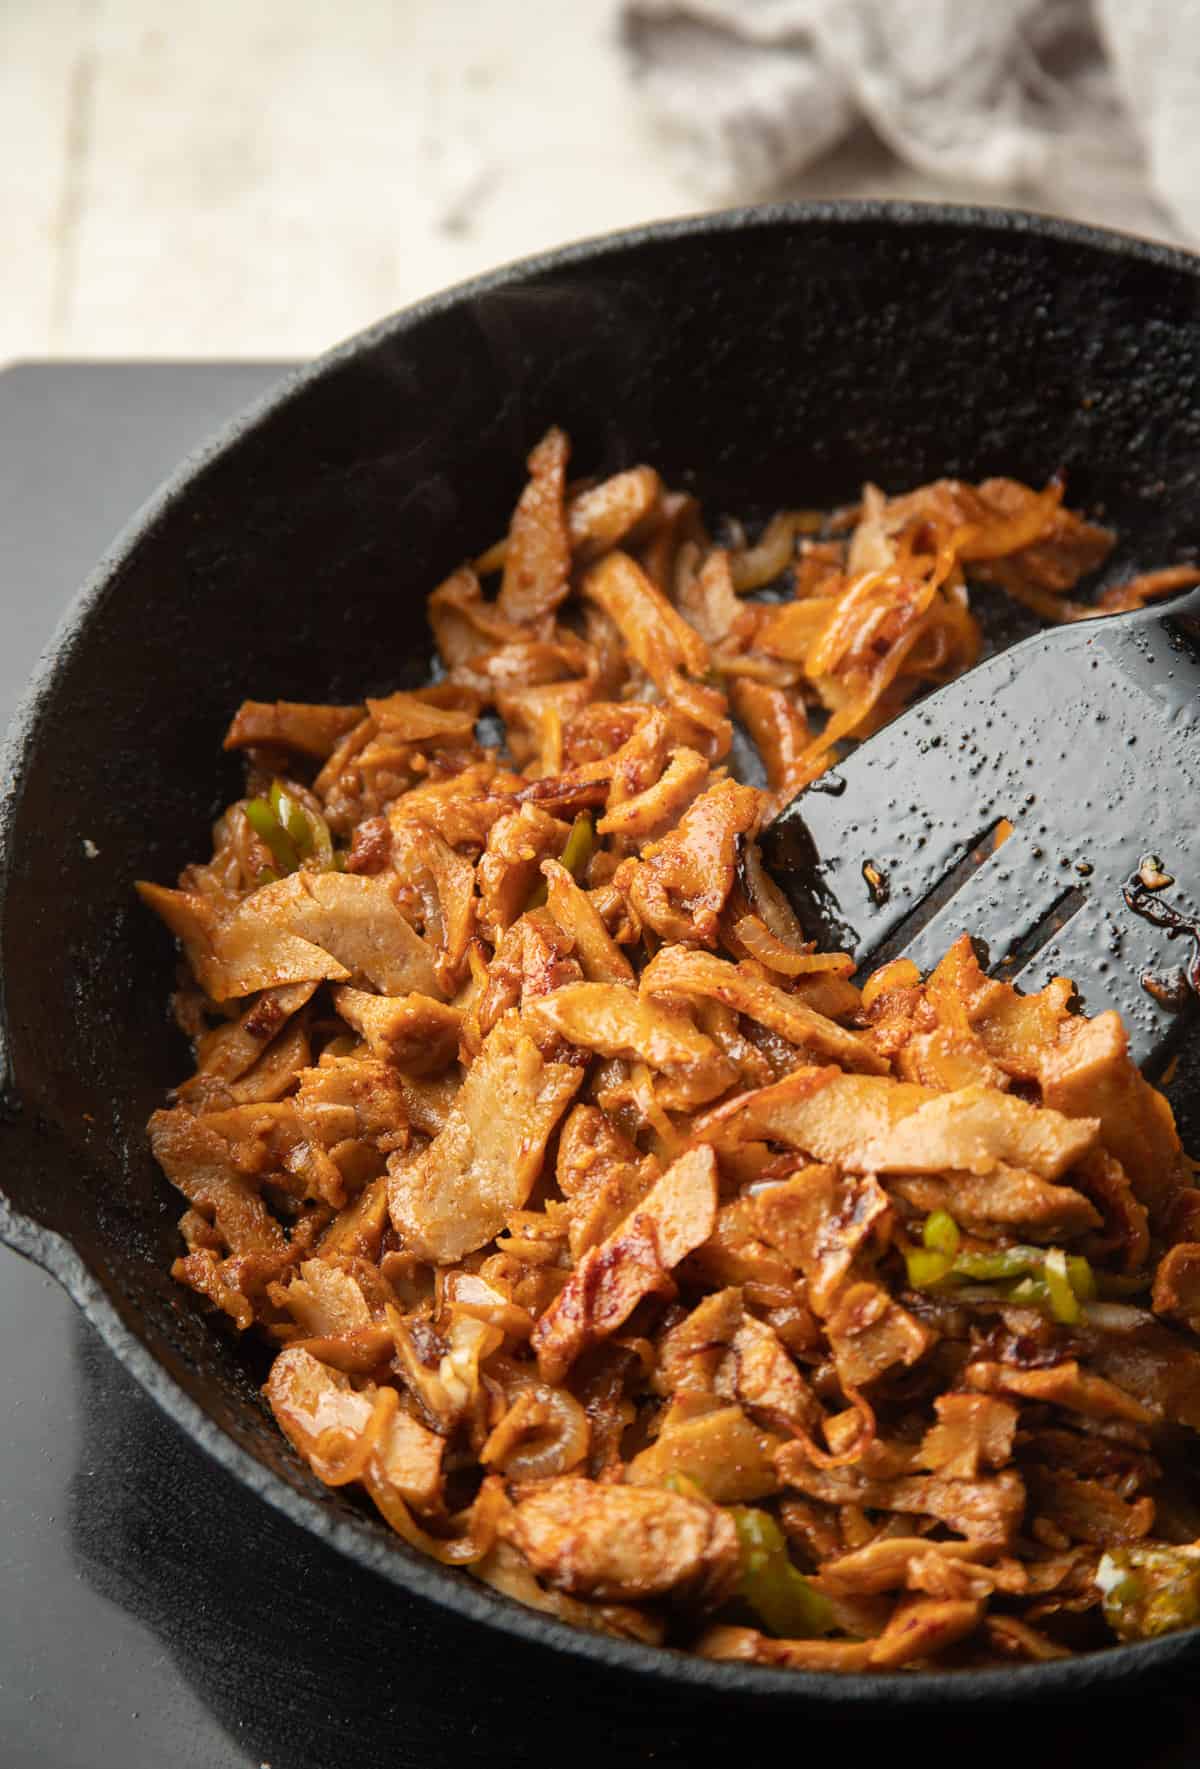 Seitan slices cooking in a skillet.